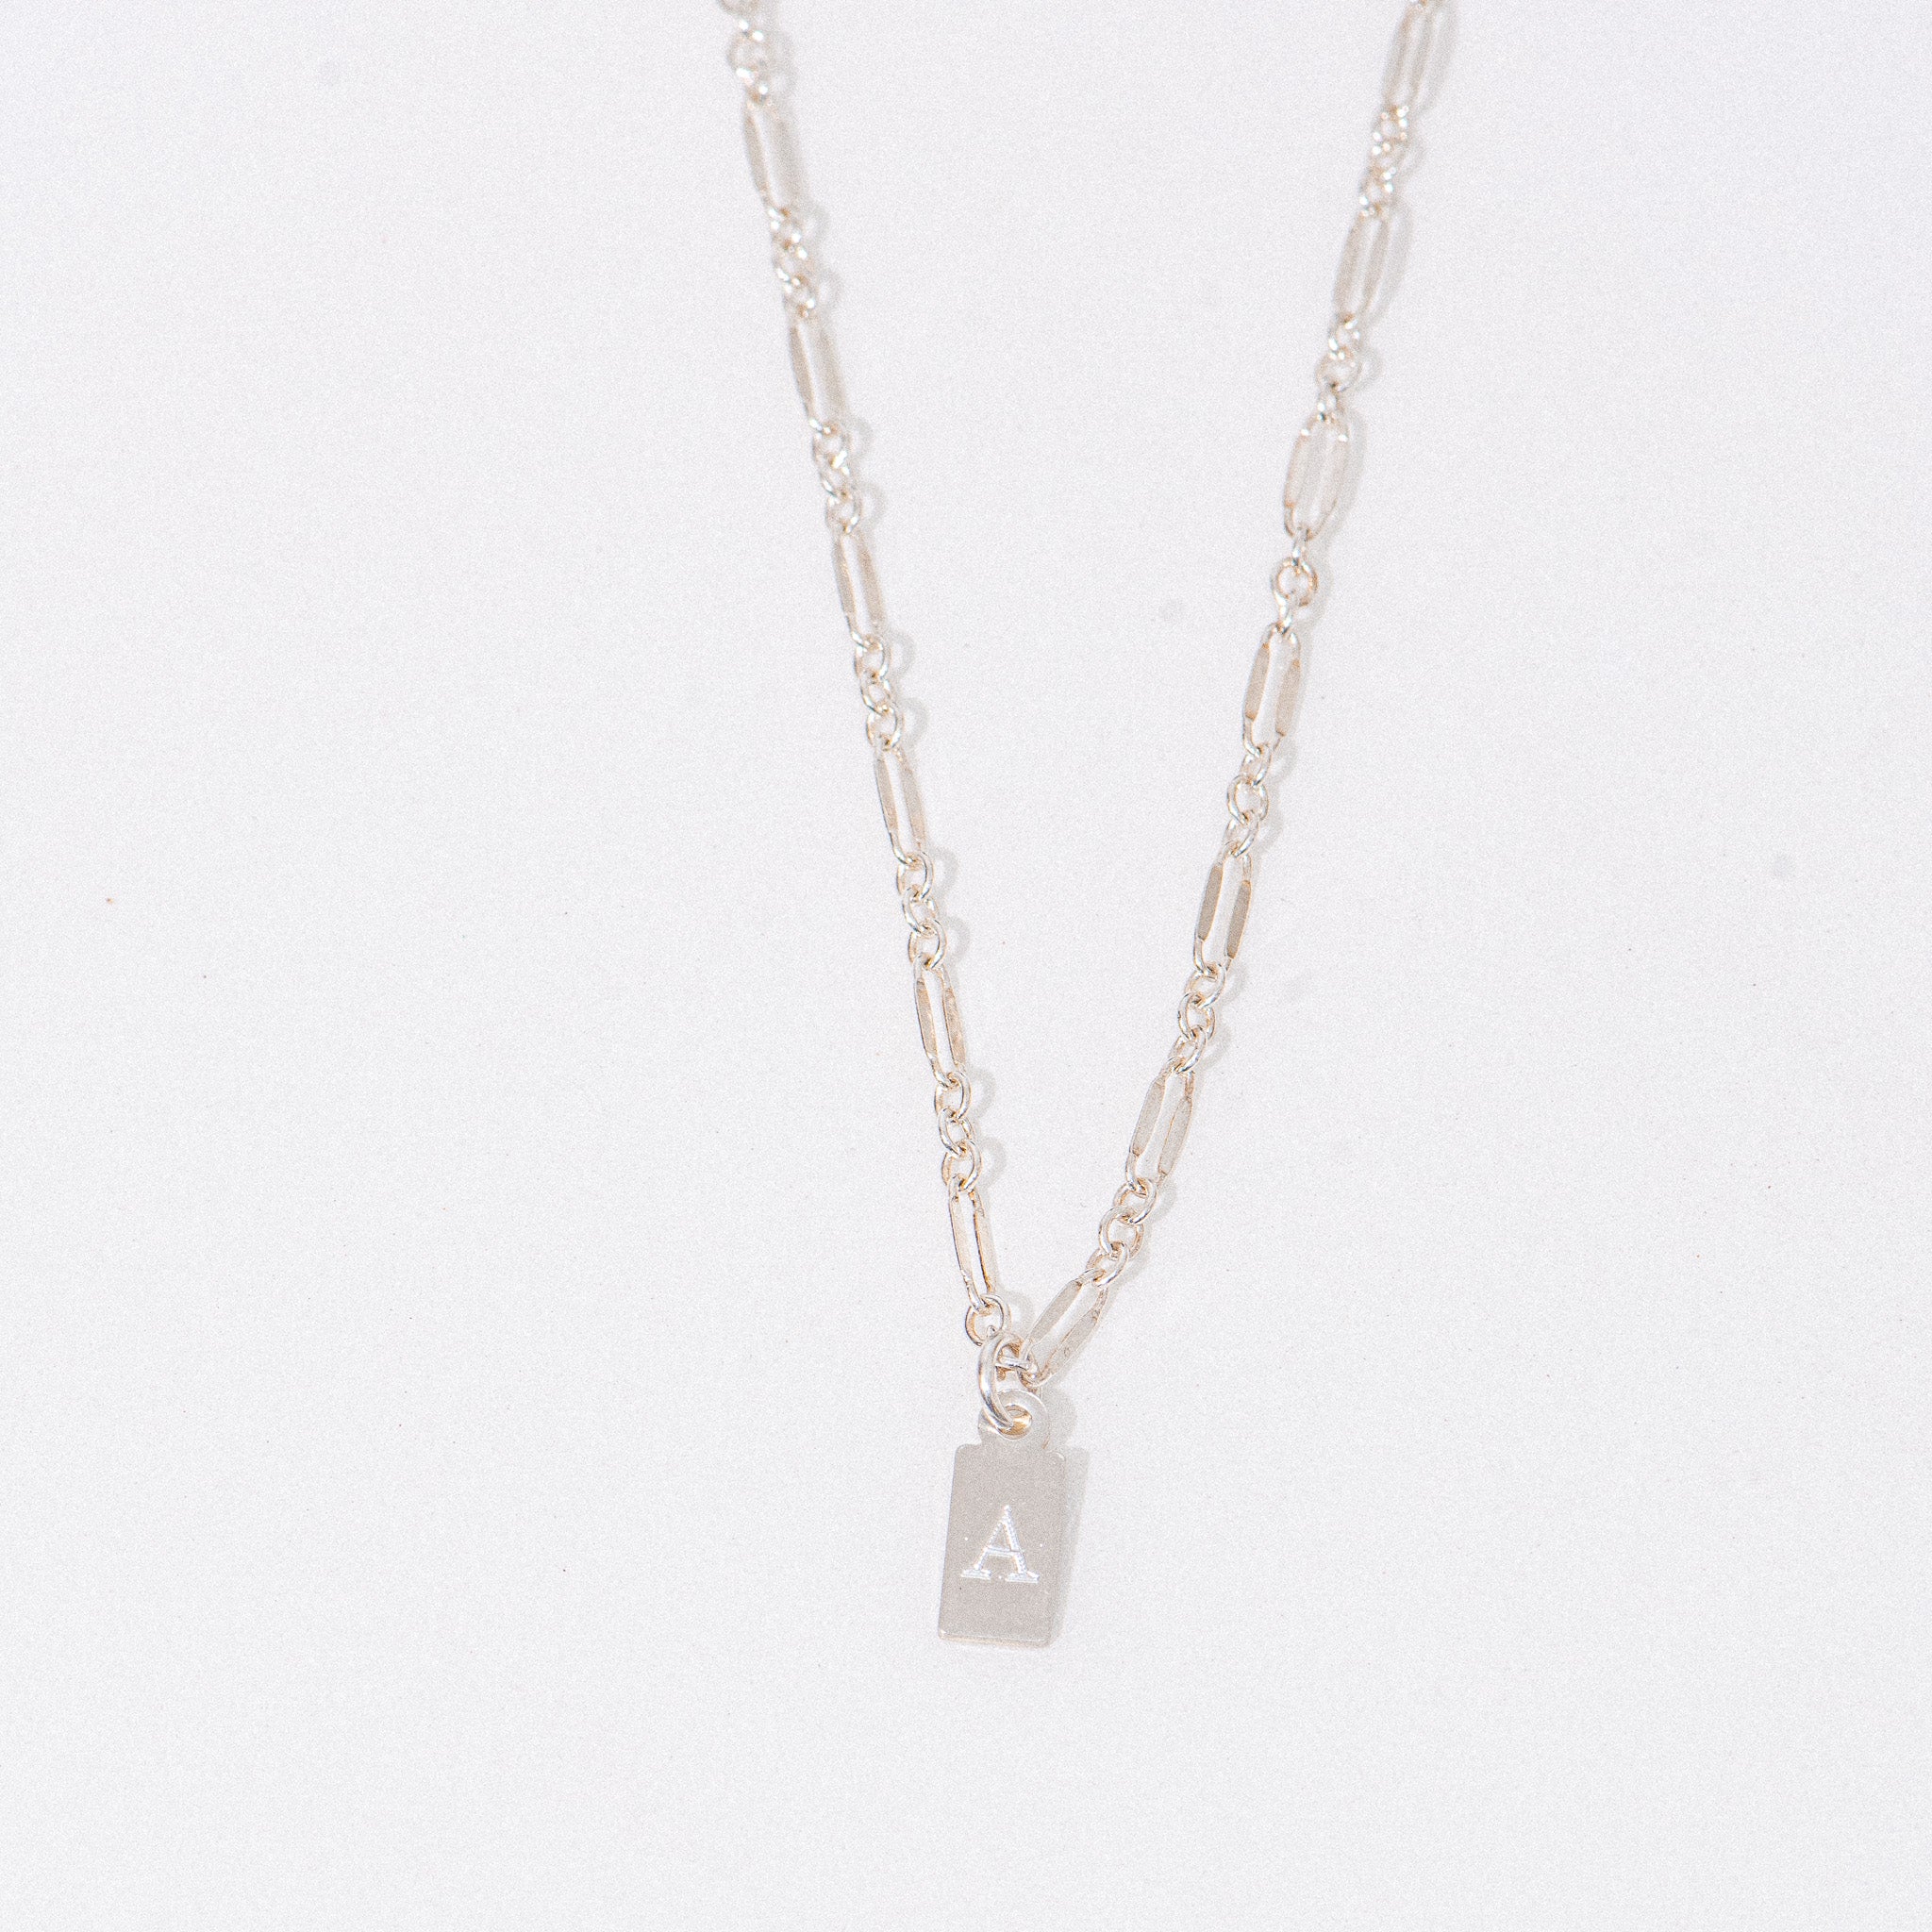 Silver Engraved 'A' Initial Necklace